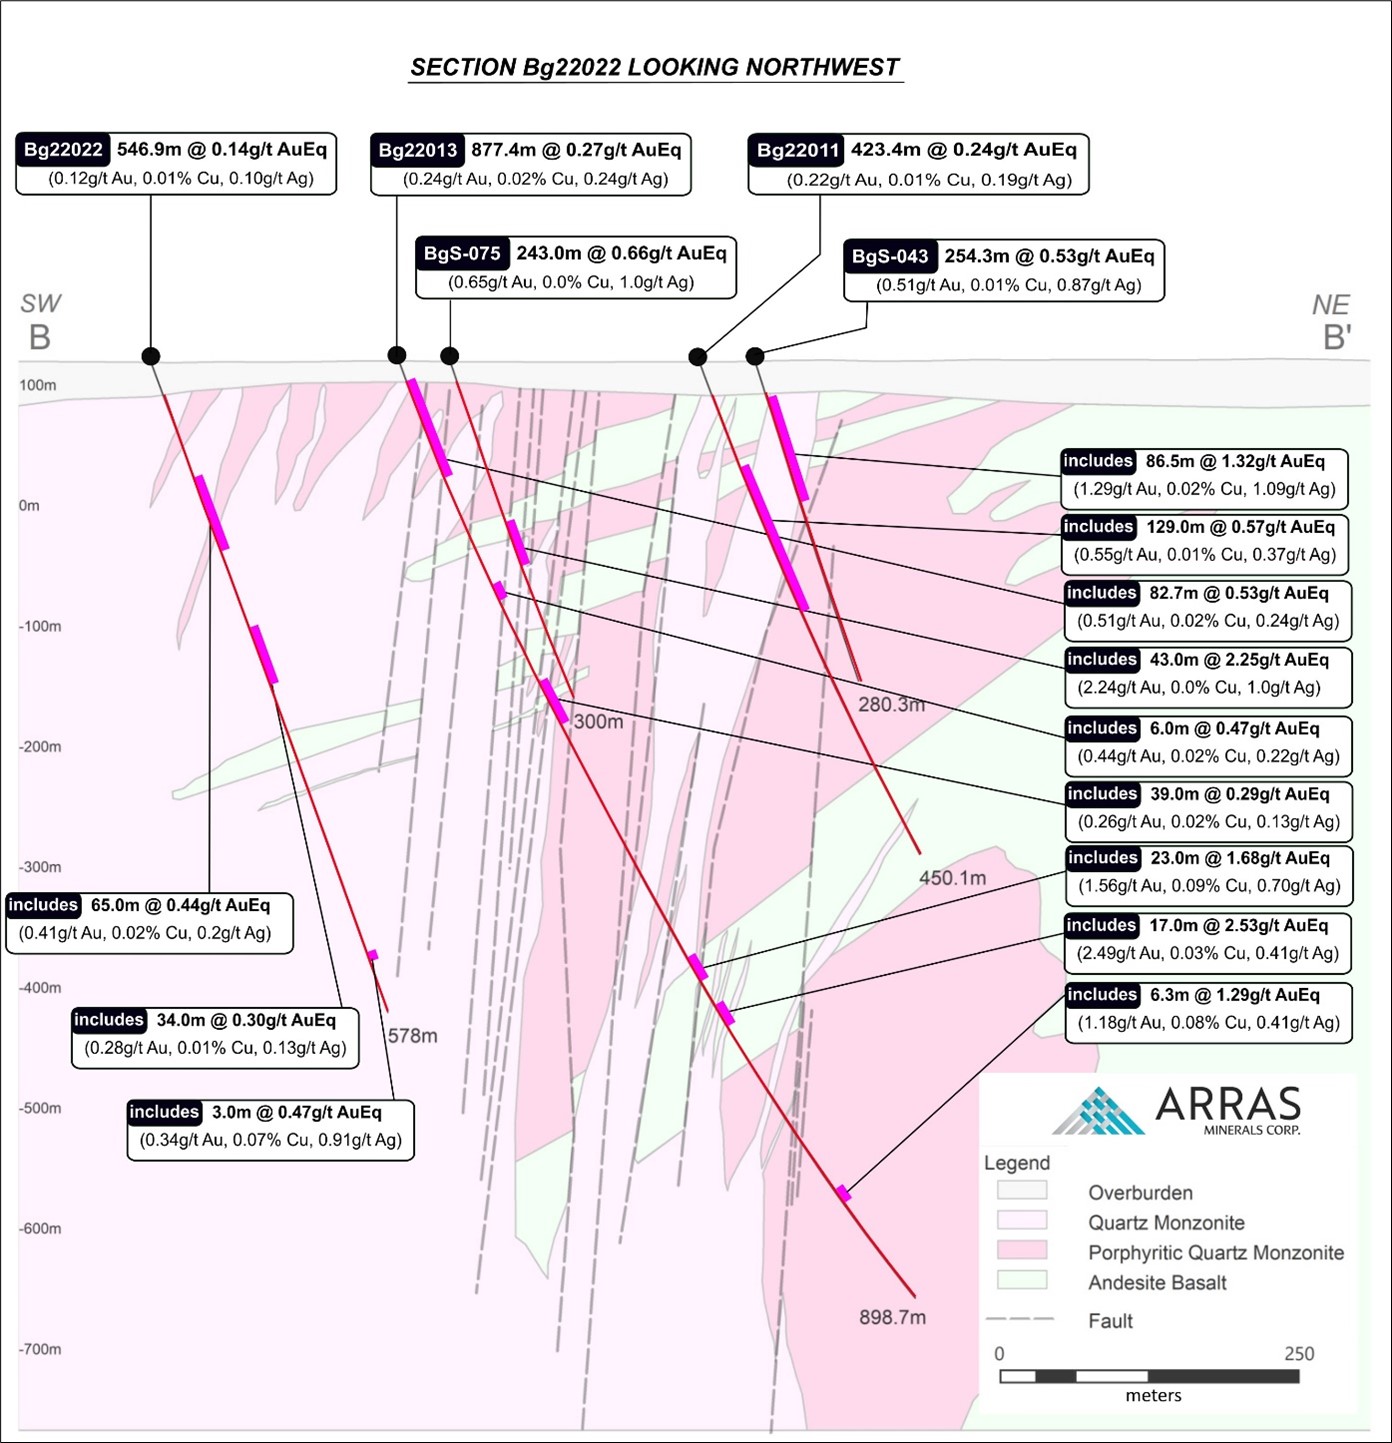 Cross-section showing drill holes Bg22022 in relation with previously drilled Bg22011 and Bg22013 and historical holes drilled by Copperbelt. AuEq grades of key intercepts in Bg22022, Bg22011, Bg22013 and historical holes are shown. The cross-section demonstrates structurally controlled mineralization largely focused in the contacts between steep, southwest dipping quartz monzonite intrusion and surrounding porphyritic quartz monzonite and andesite basalts.